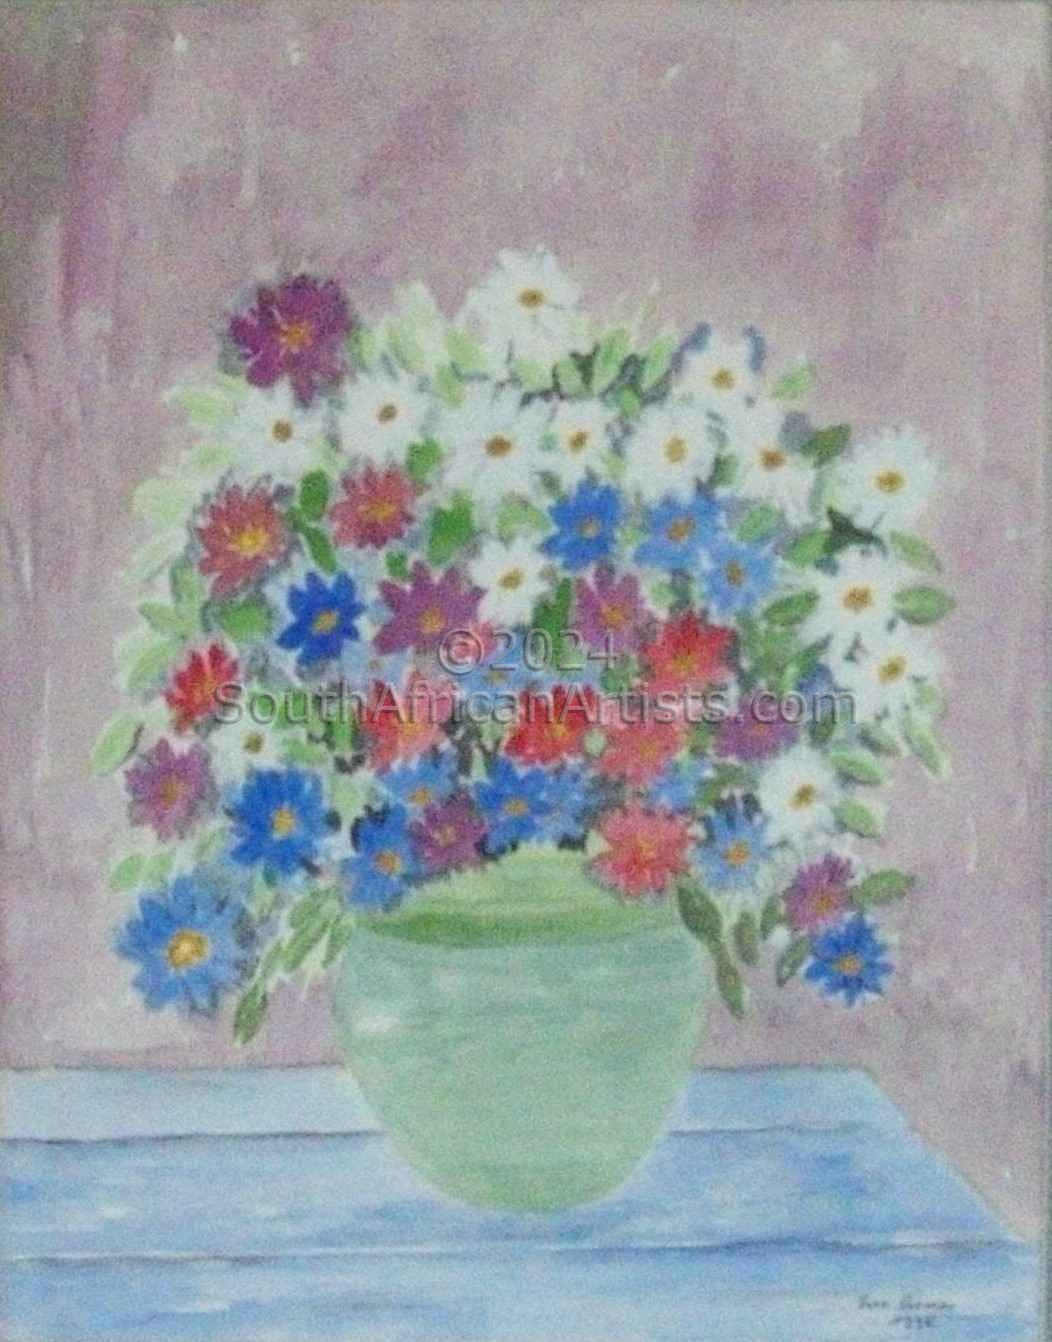 Flowers Mixed in a Vase